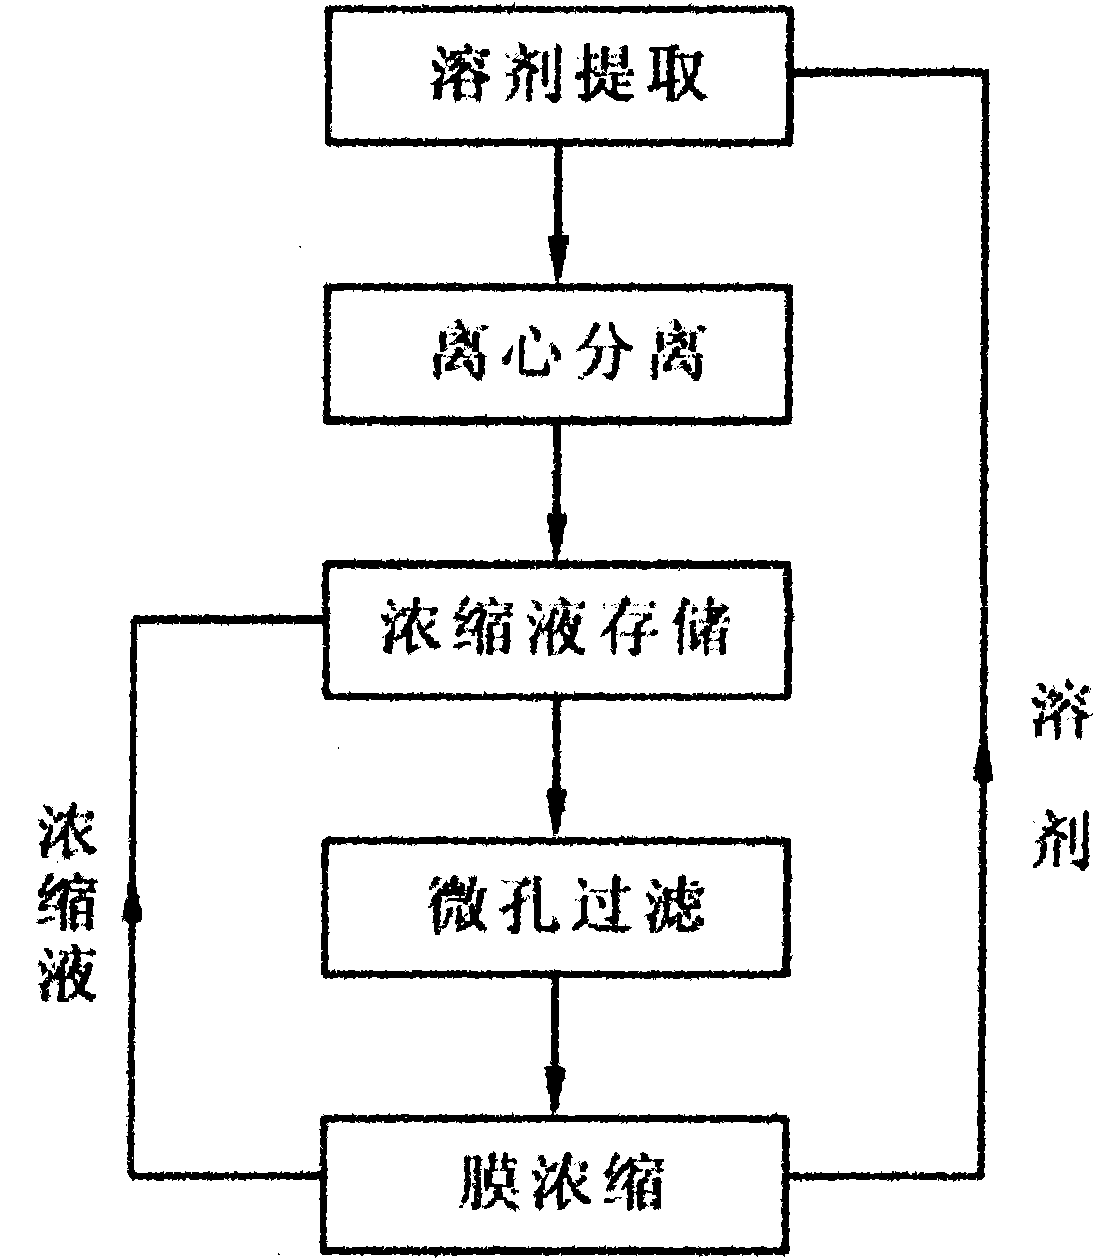 Energy-saving concentration process for extracting active ingredients of plants and concentration device thereof